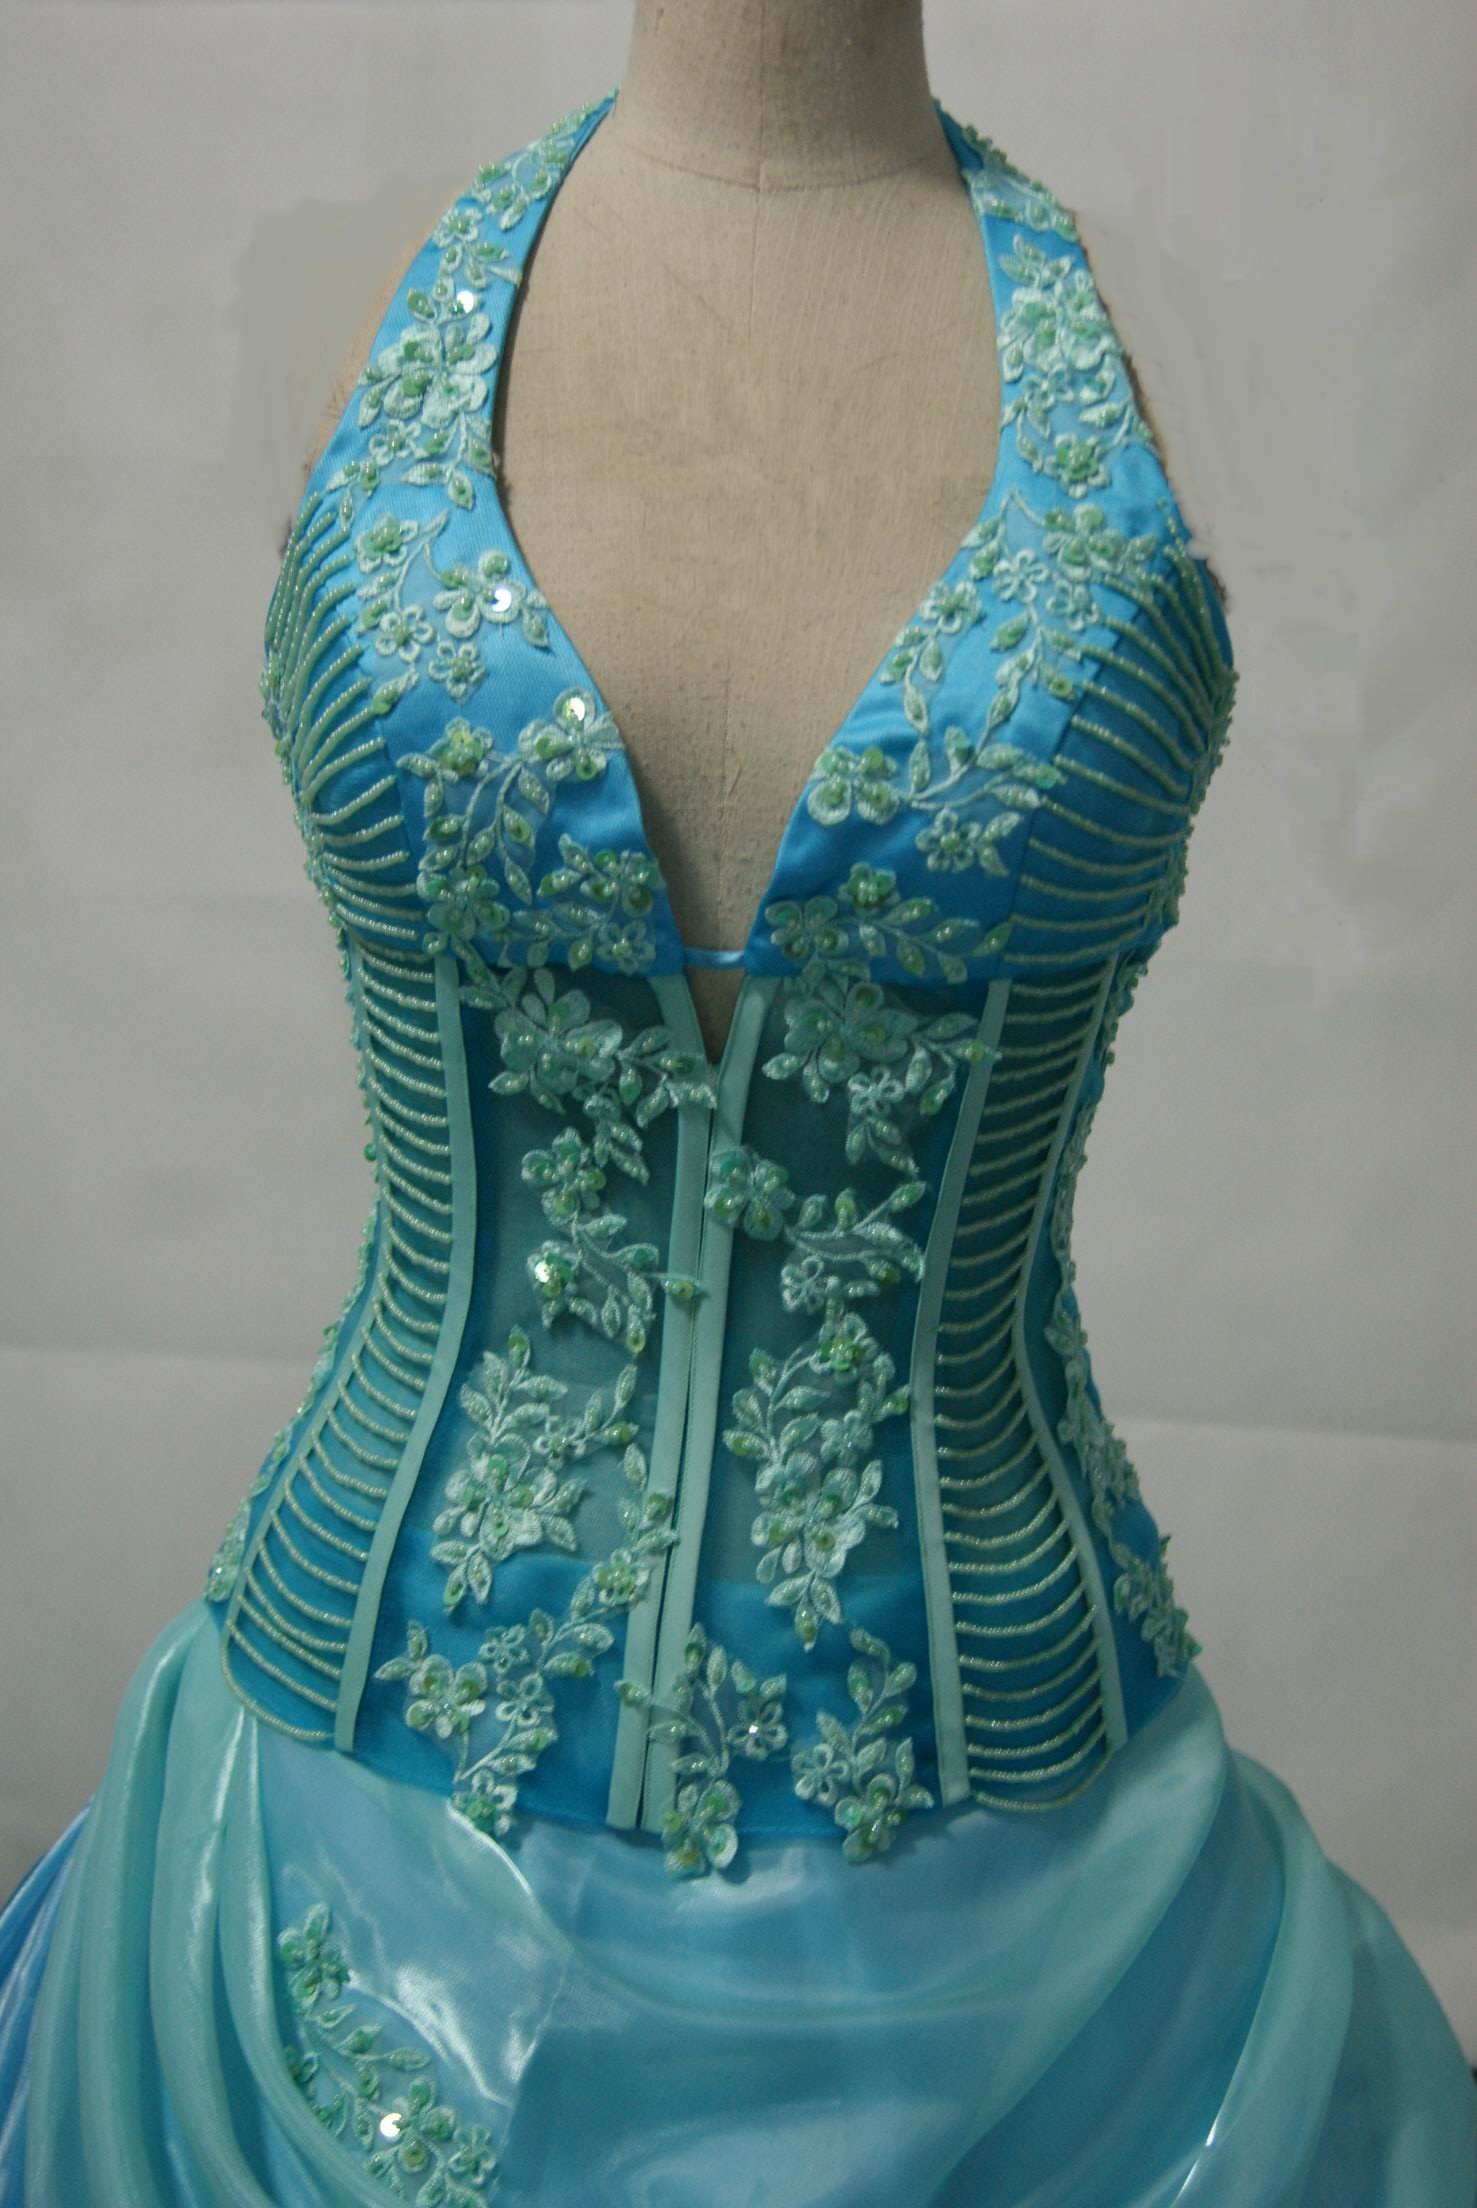 Corset gown with see through corset is lined with sheer sky blue